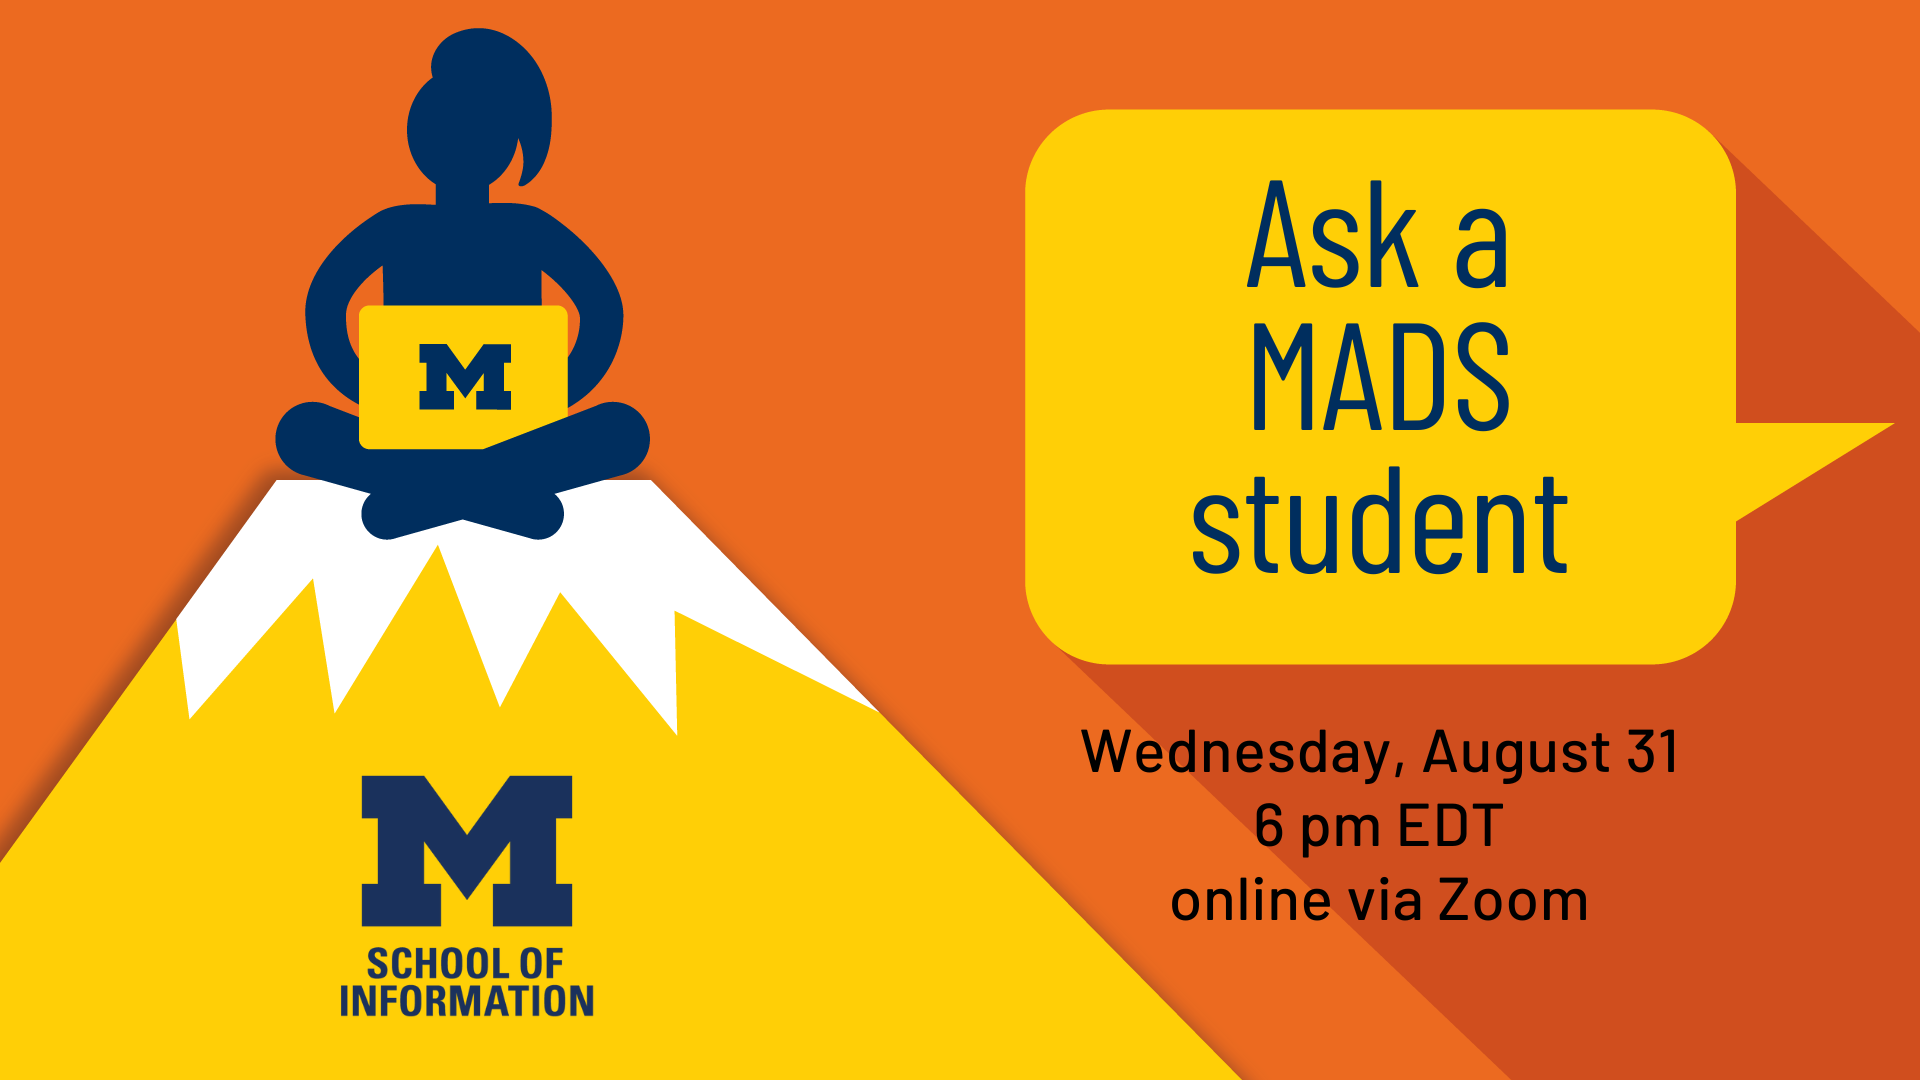 "Ask a MADS student. Wednesday, August 31. 6 pm EDT. online via Zoom."